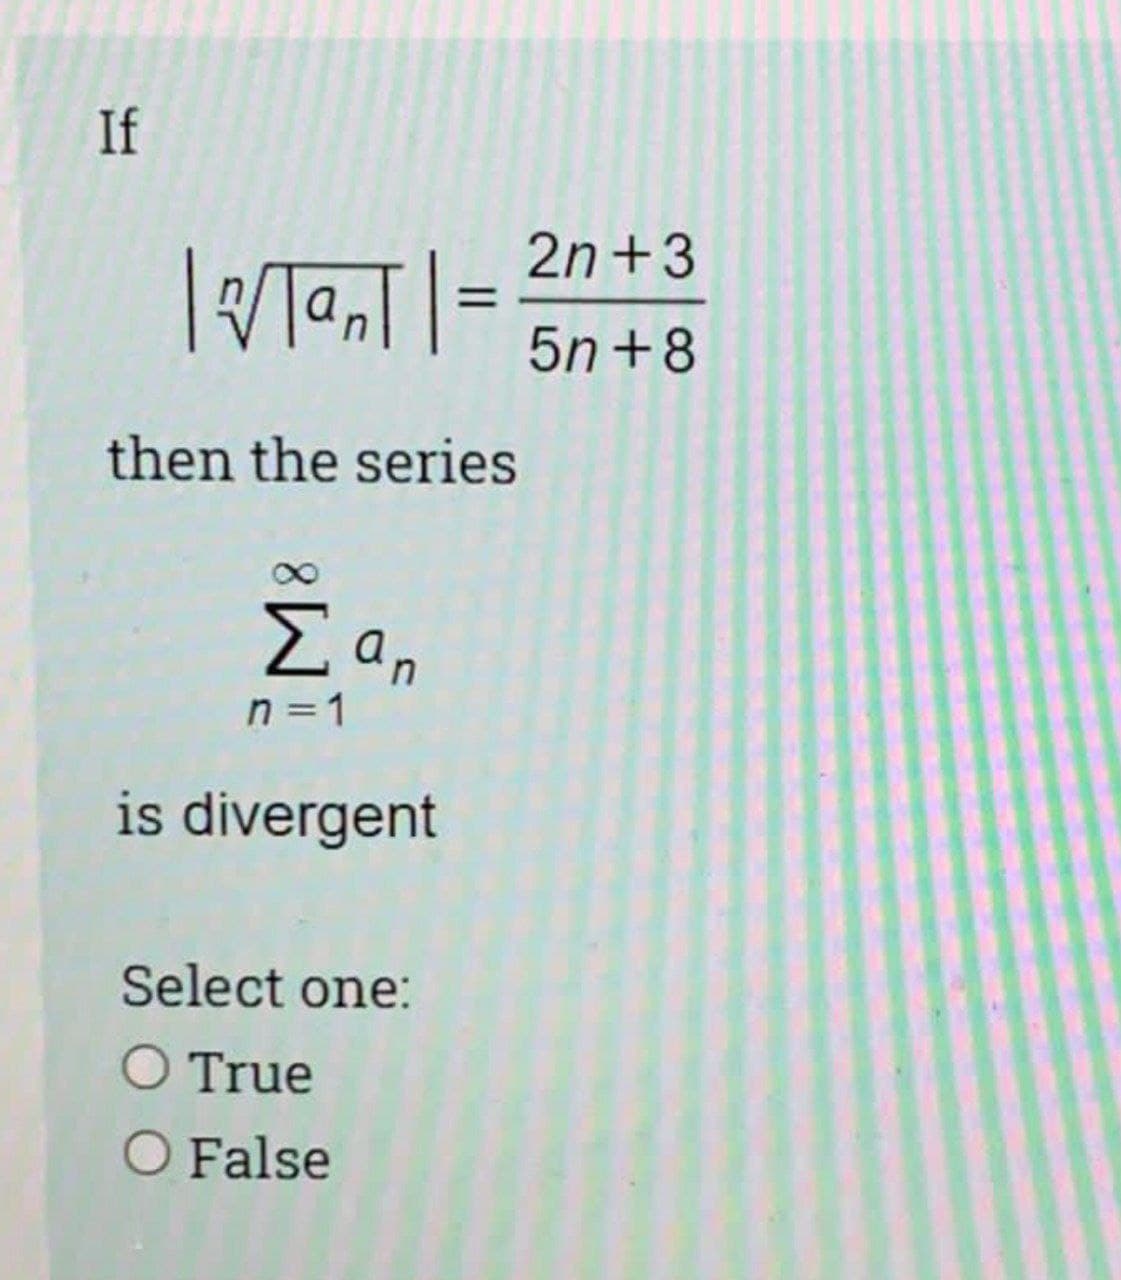 If
2n+3
5n +8
then the series
E an
n = 1
is divergent
Select one:
O True
O False
